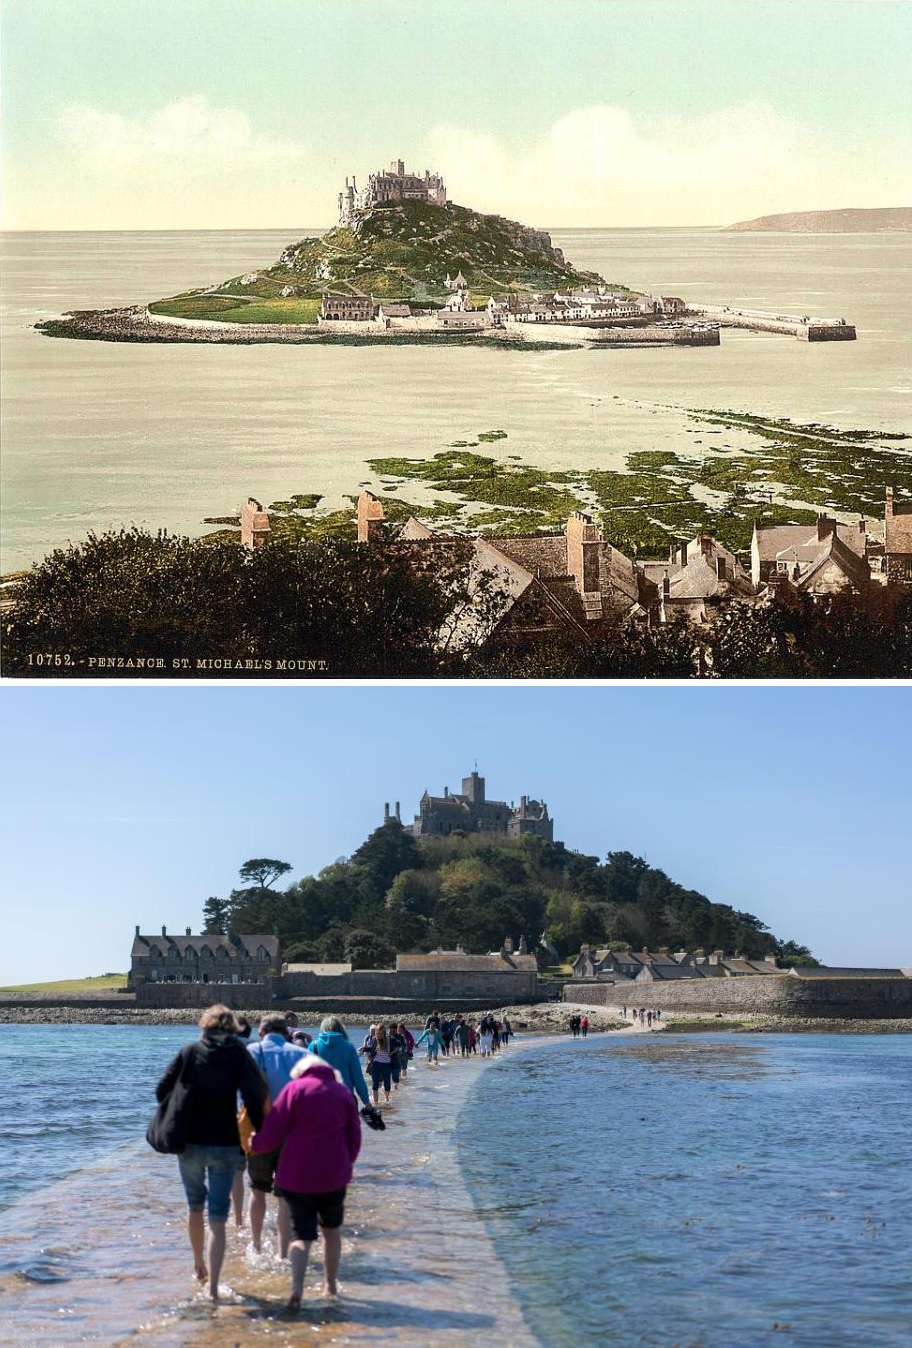 The scenic and isolated St Michael's Mount in Penzance was popular with visitors to Cornwall.